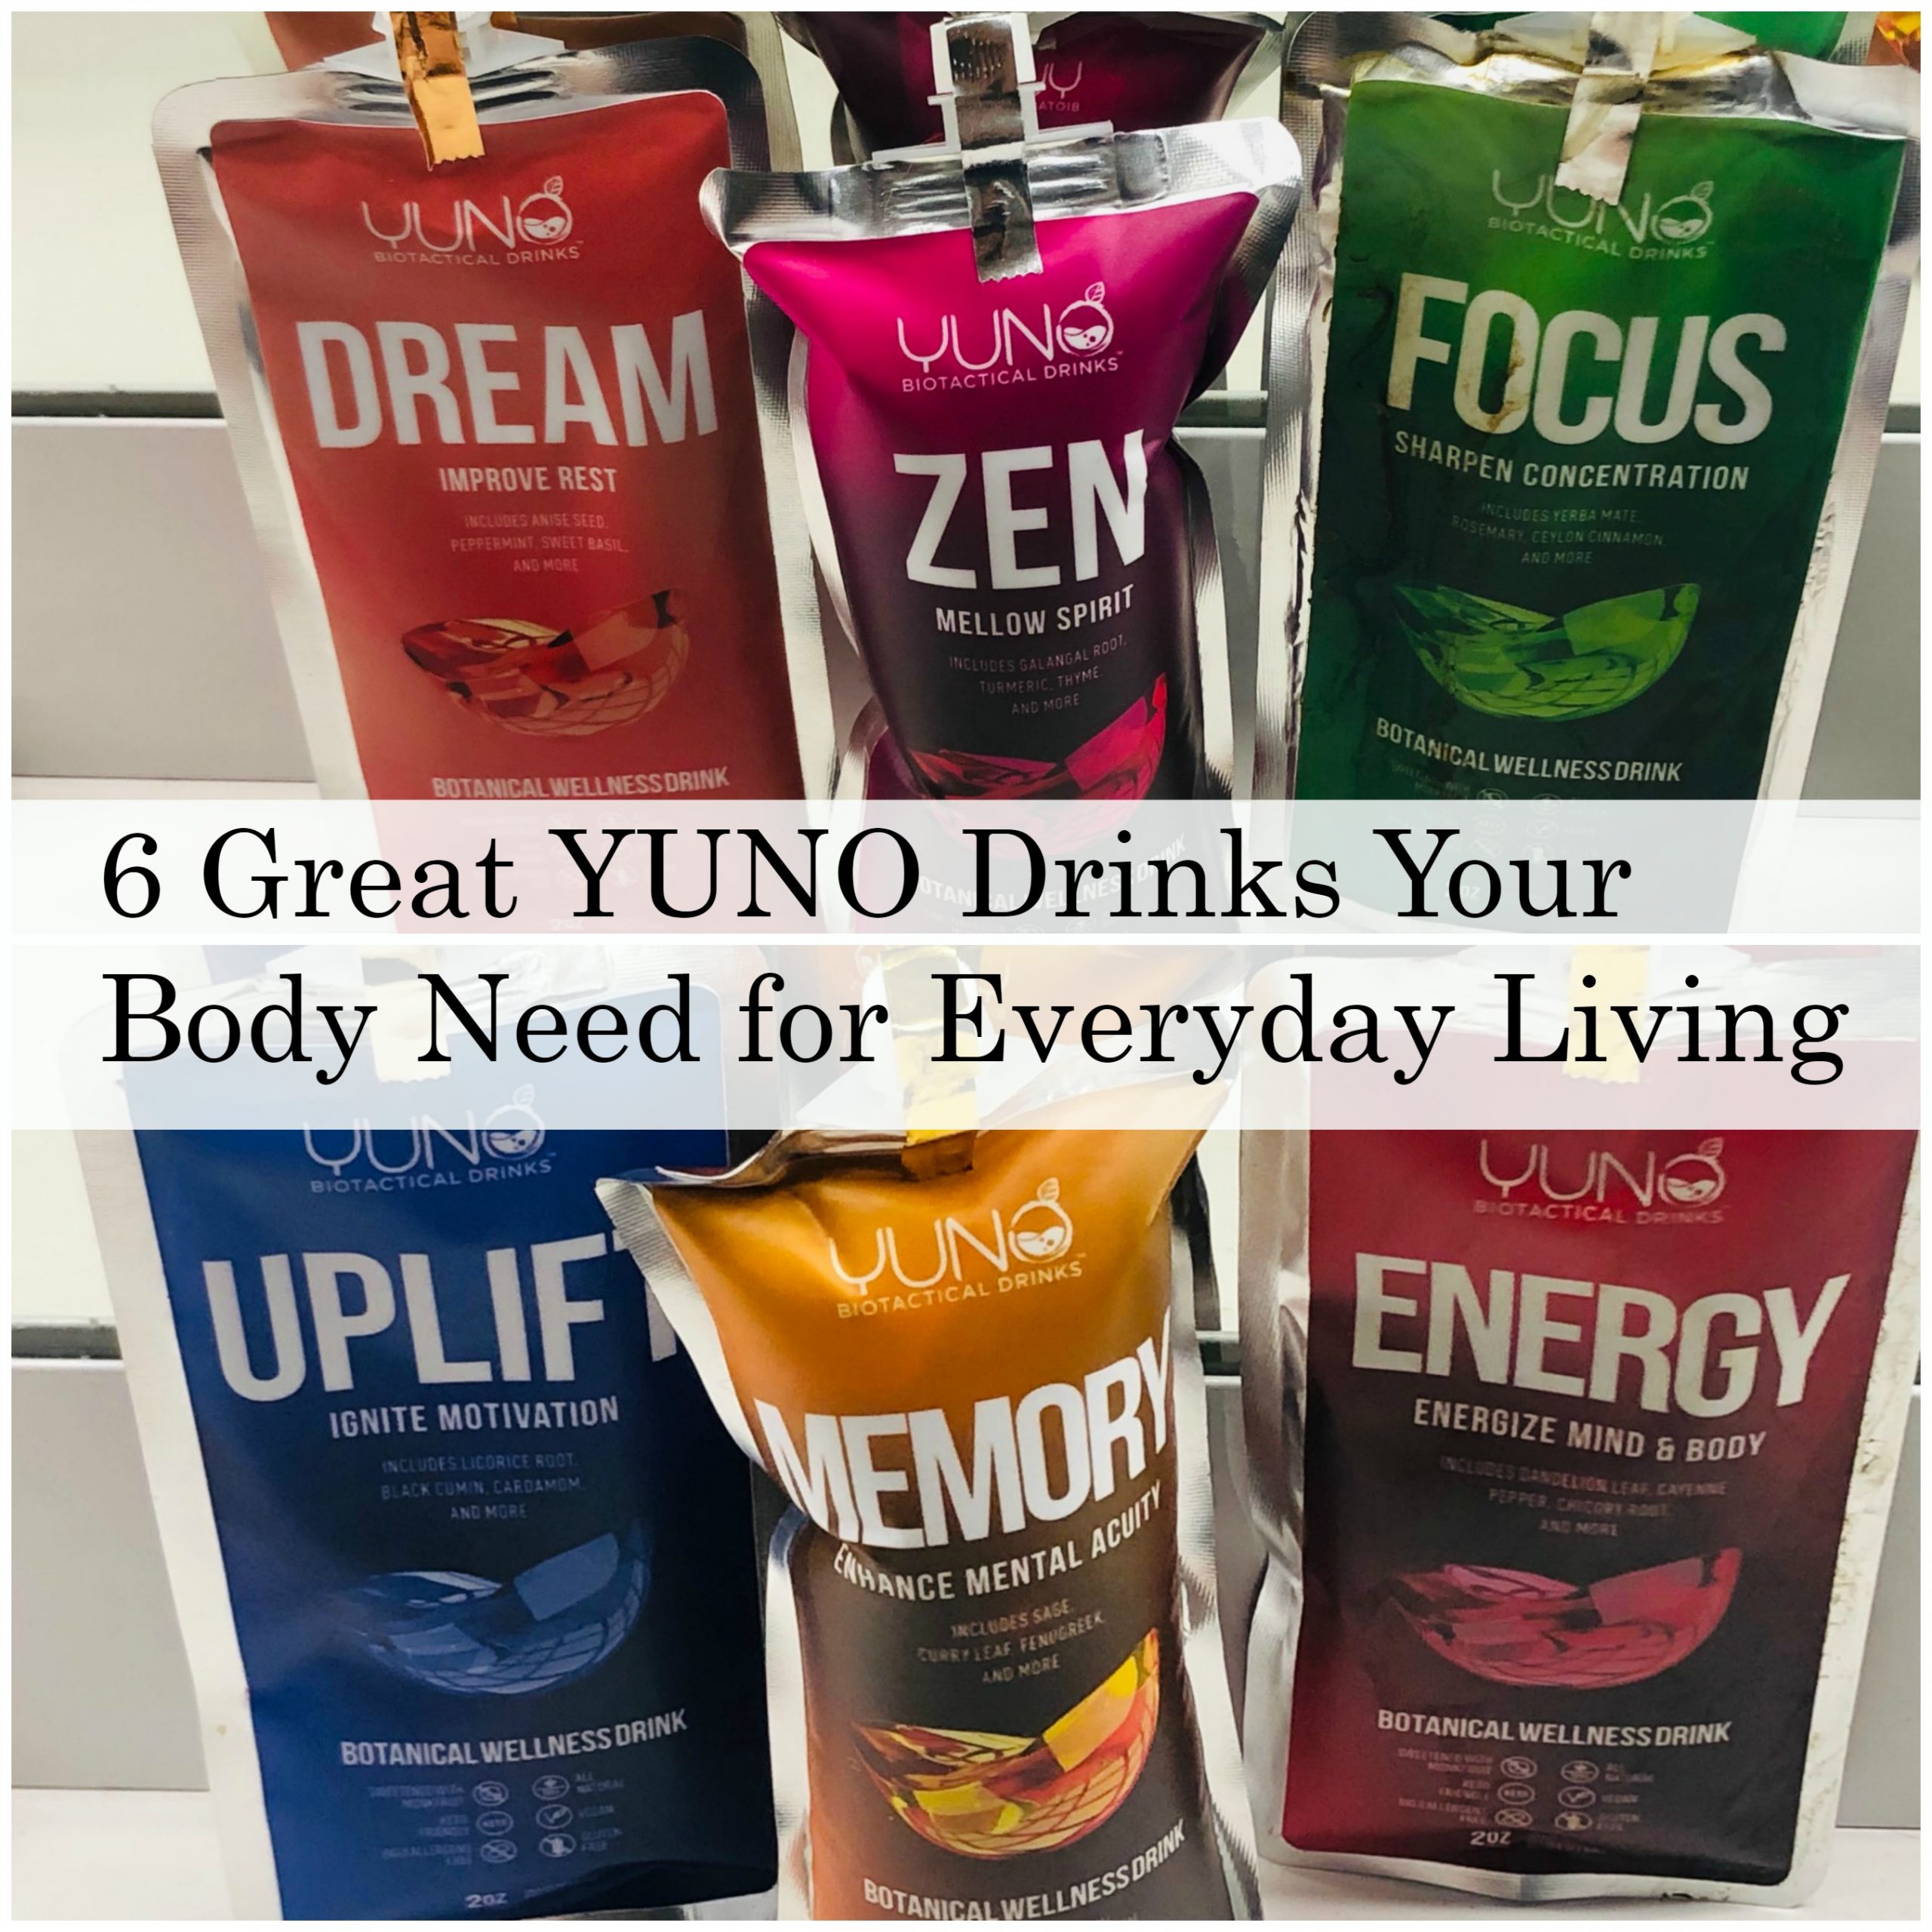 6 Great YUNO Drinks Your Body Need for Everyday Living